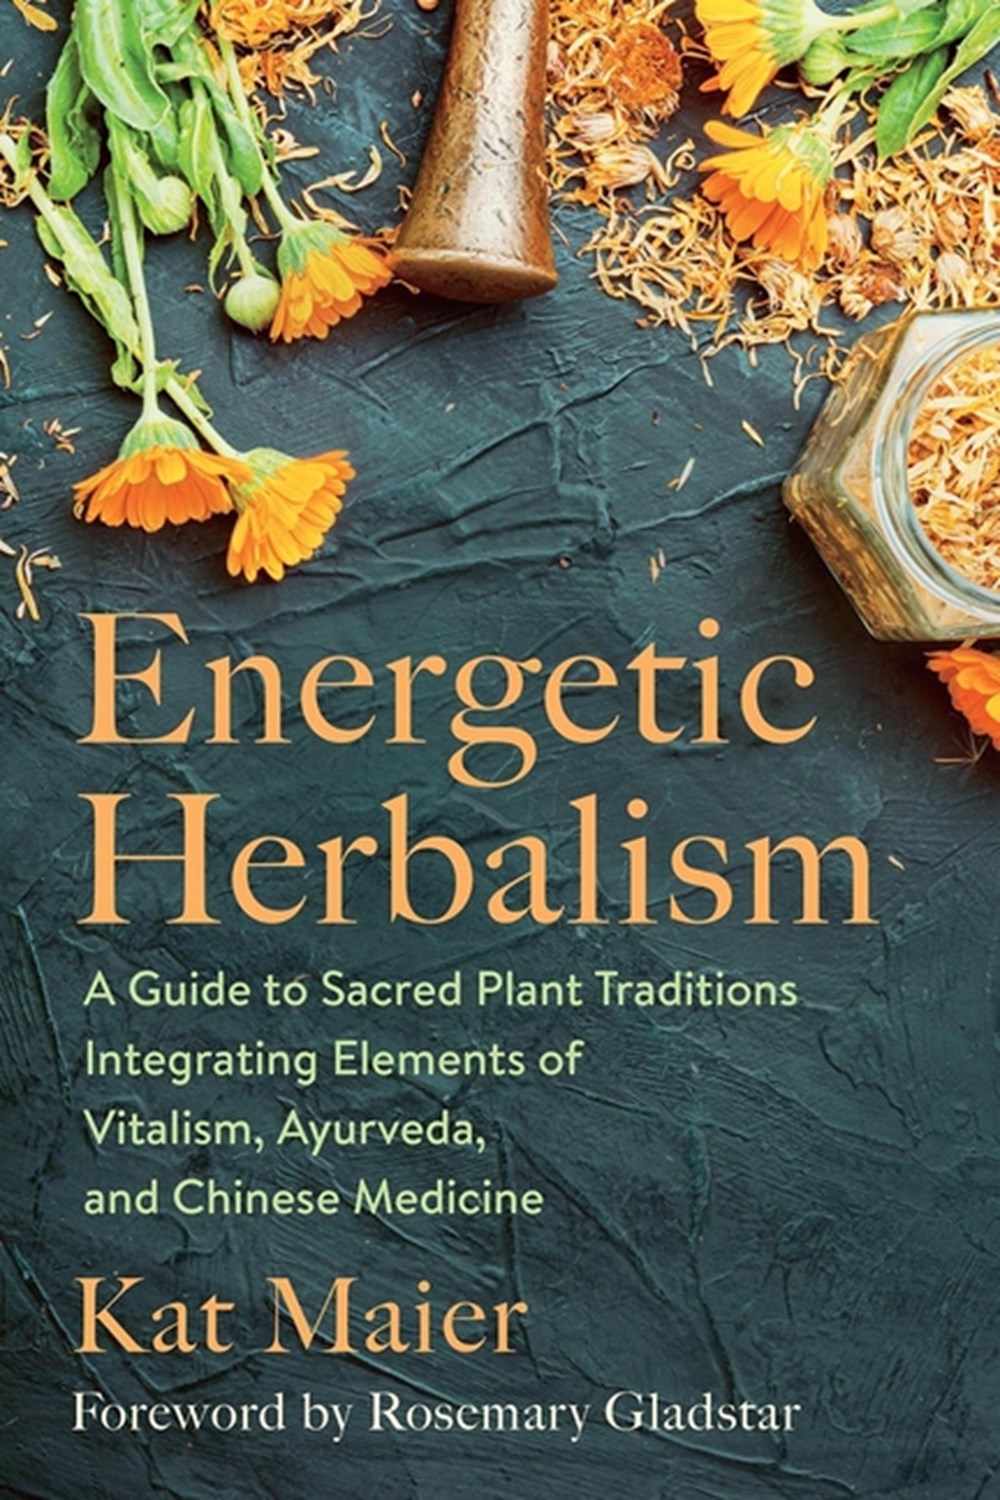 Energetic Herbalism A Guide to Sacred Plant Traditions Integrating Elements of Vitalism, Ayurveda, a